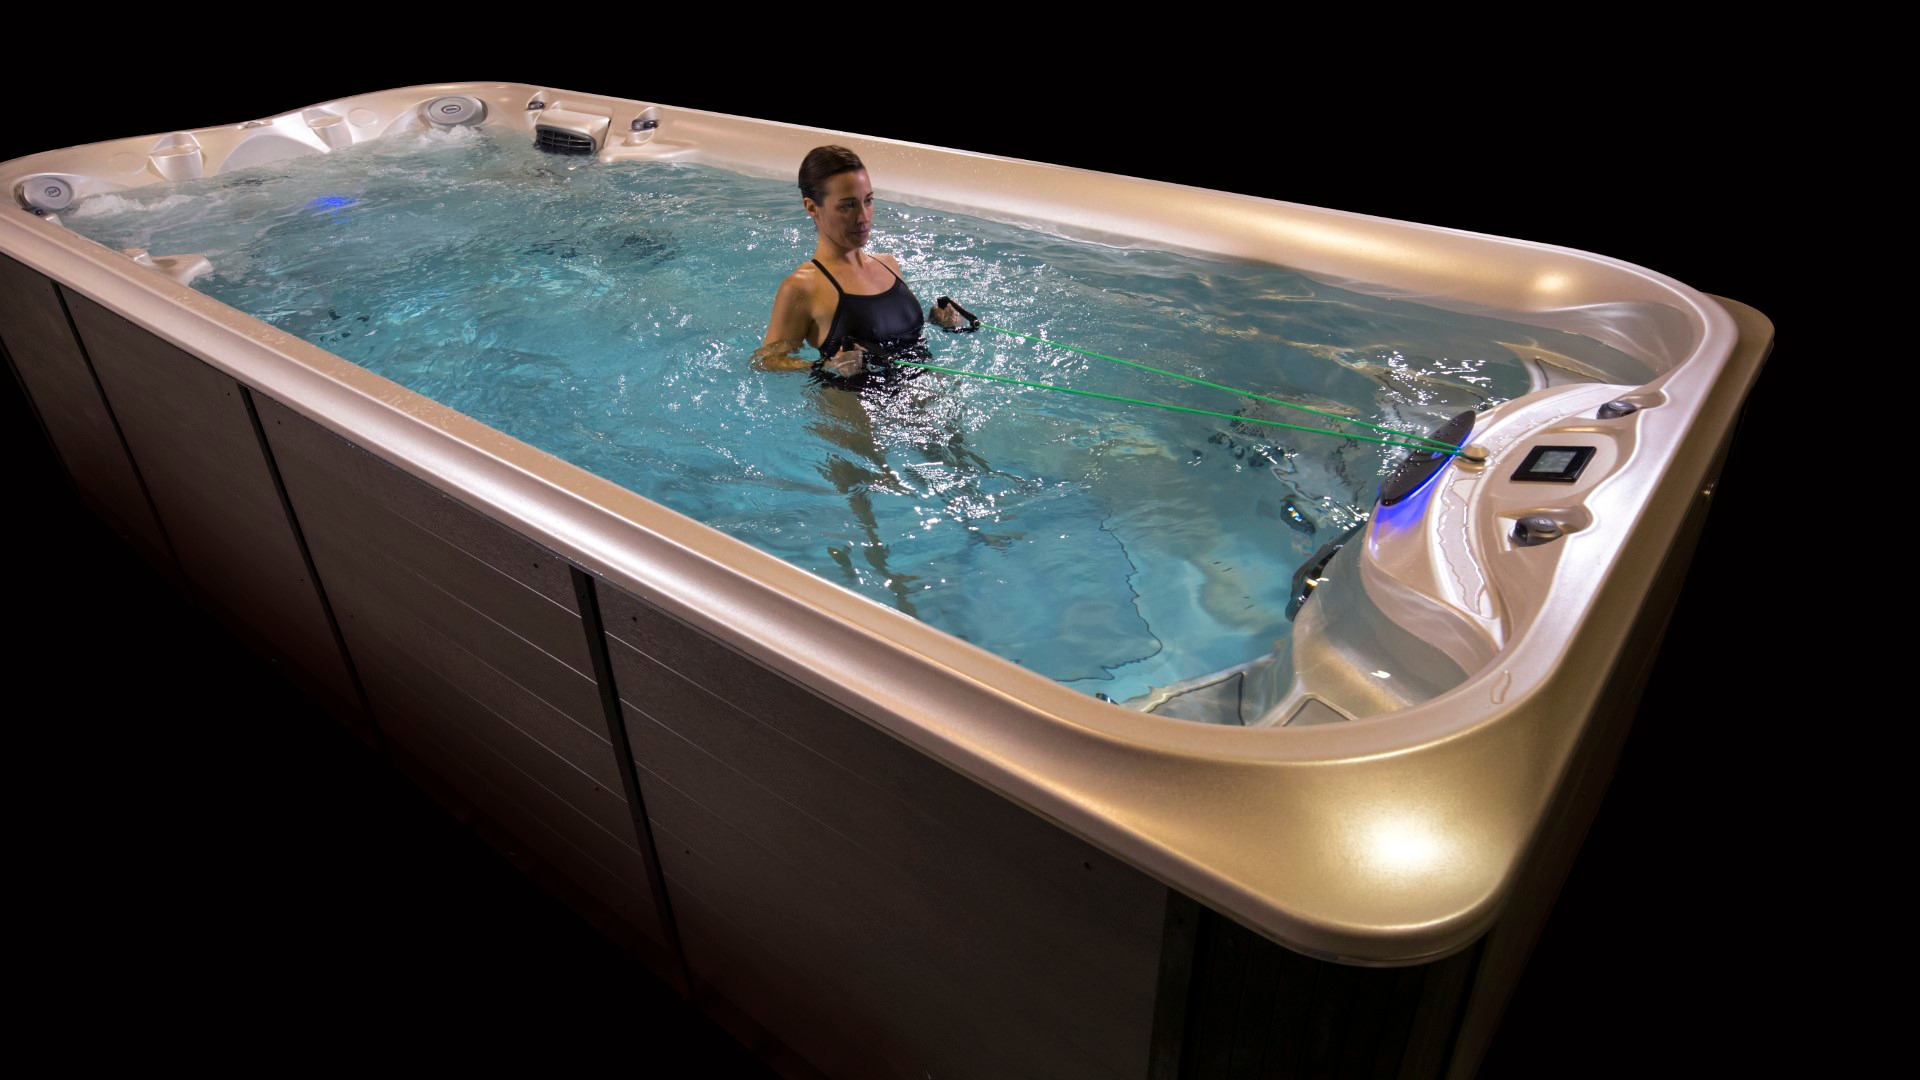 jcz19-2019-19ft-jacuzzi-ss-jodie-exercise-resistance-band-image-3862-groot.jpg